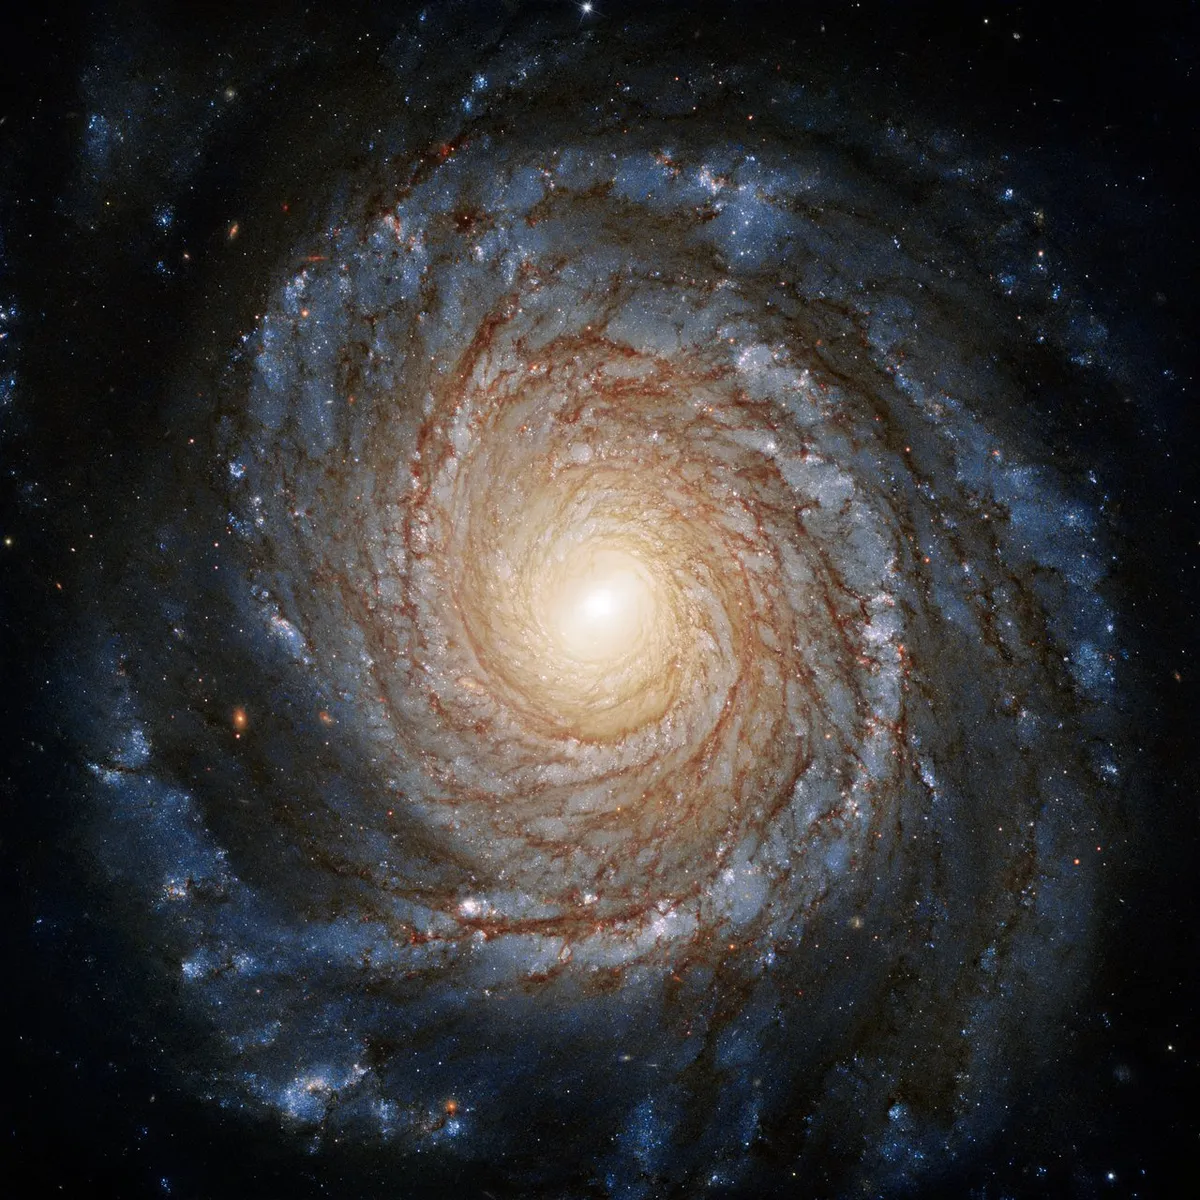 NGC 3147 11 July 2019. This galaxy is roughly 130 million lightyears away in the constellation of Draco the Dragon. Credit: ESA/Hubble & NASA, A. Riess et al.